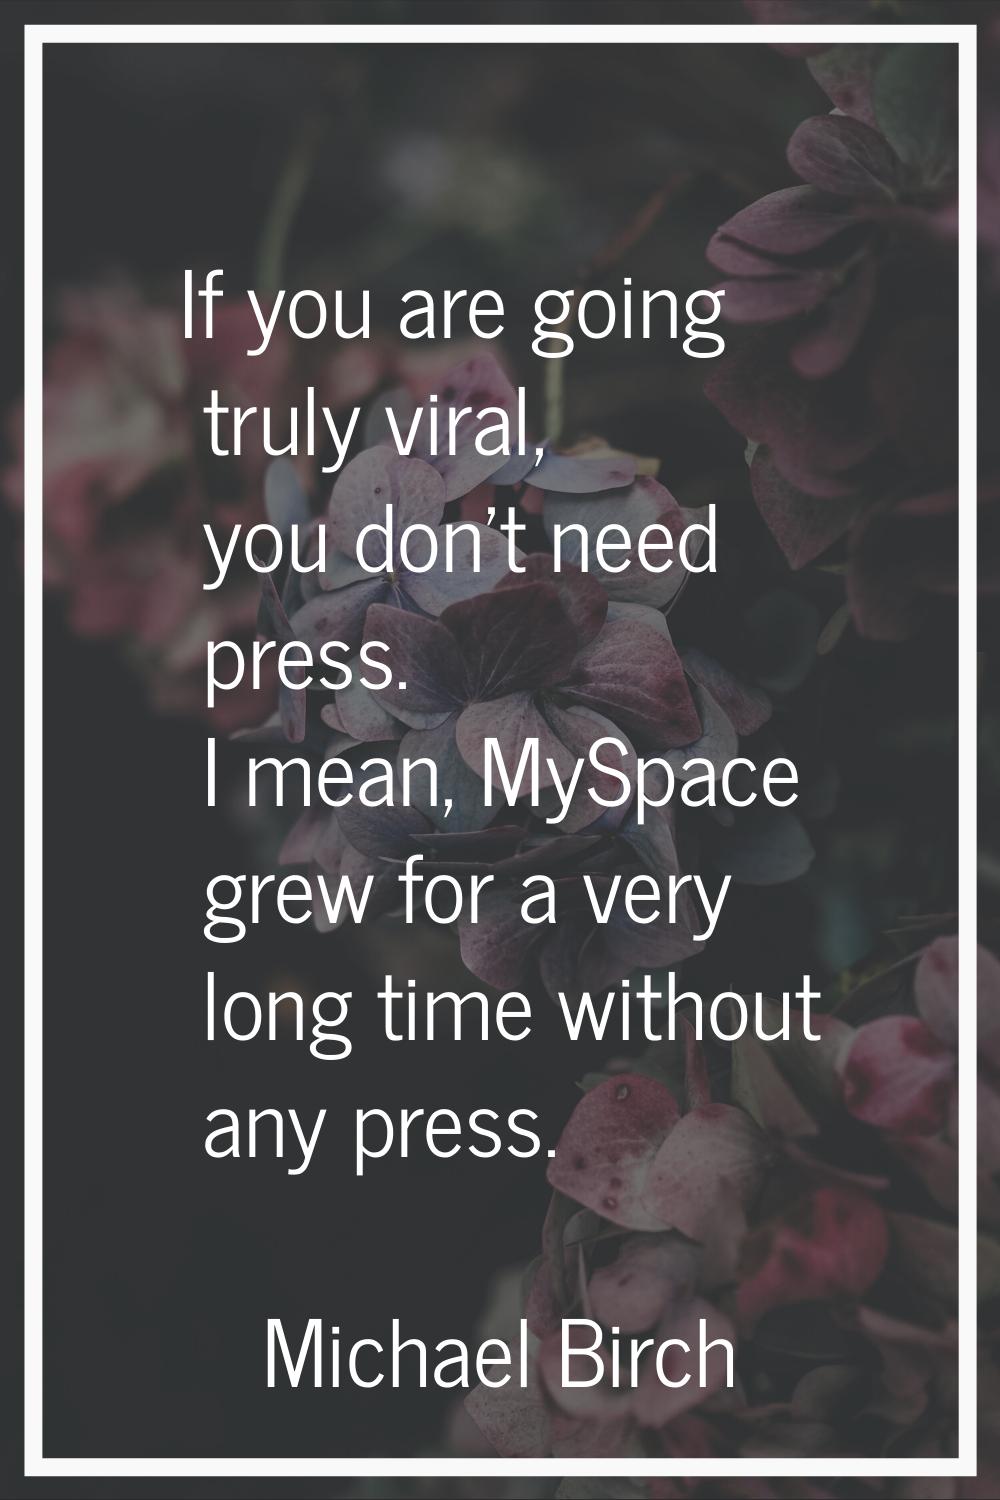 If you are going truly viral, you don't need press. I mean, MySpace grew for a very long time witho